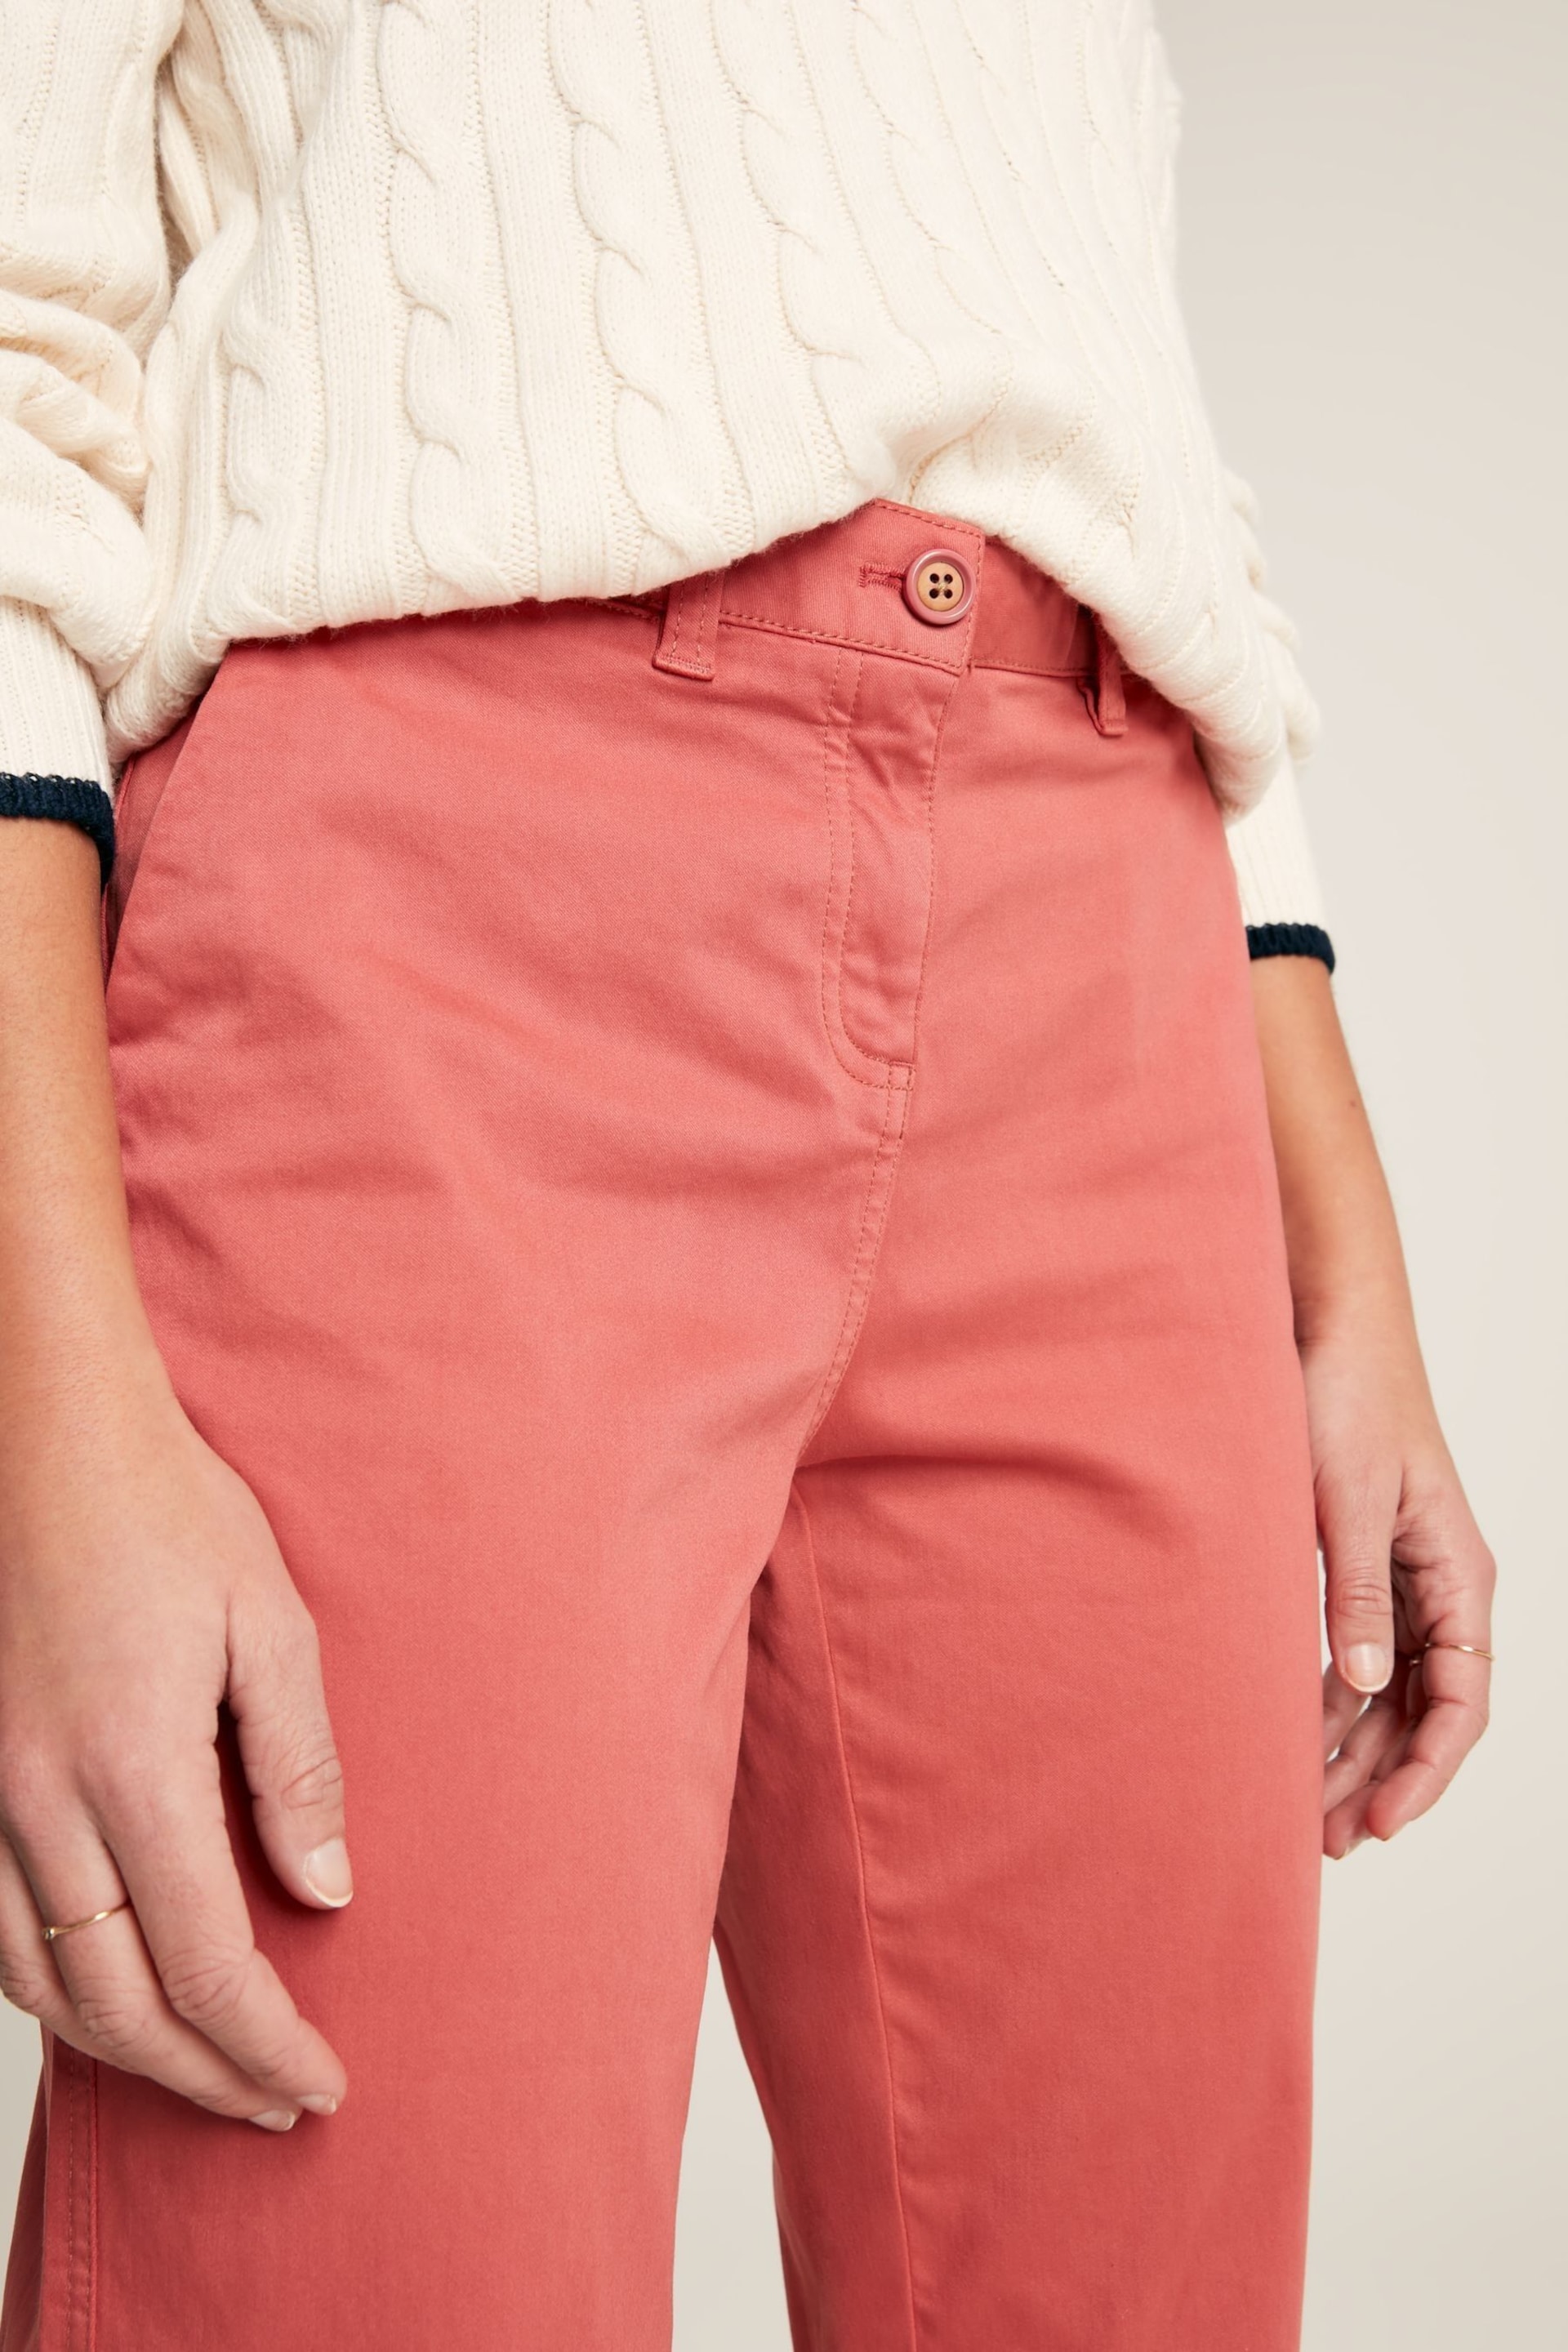 Joules Hesford Pink Chino Trousers - Image 4 of 5